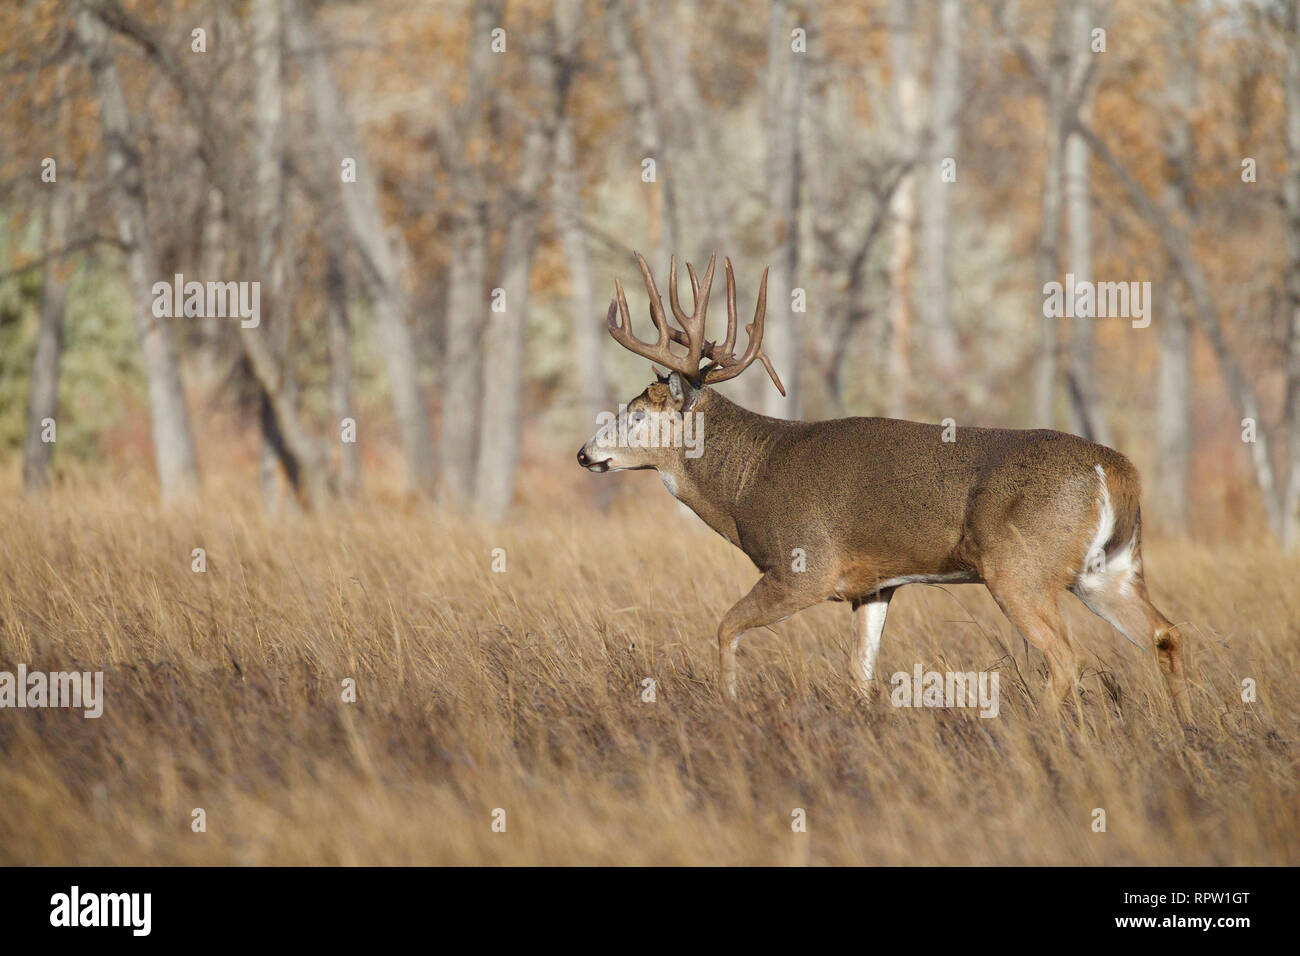 Whitetail Deer - a trophy class buck walks through a grassy meadow with a hardwood forest in the background Stock Photo